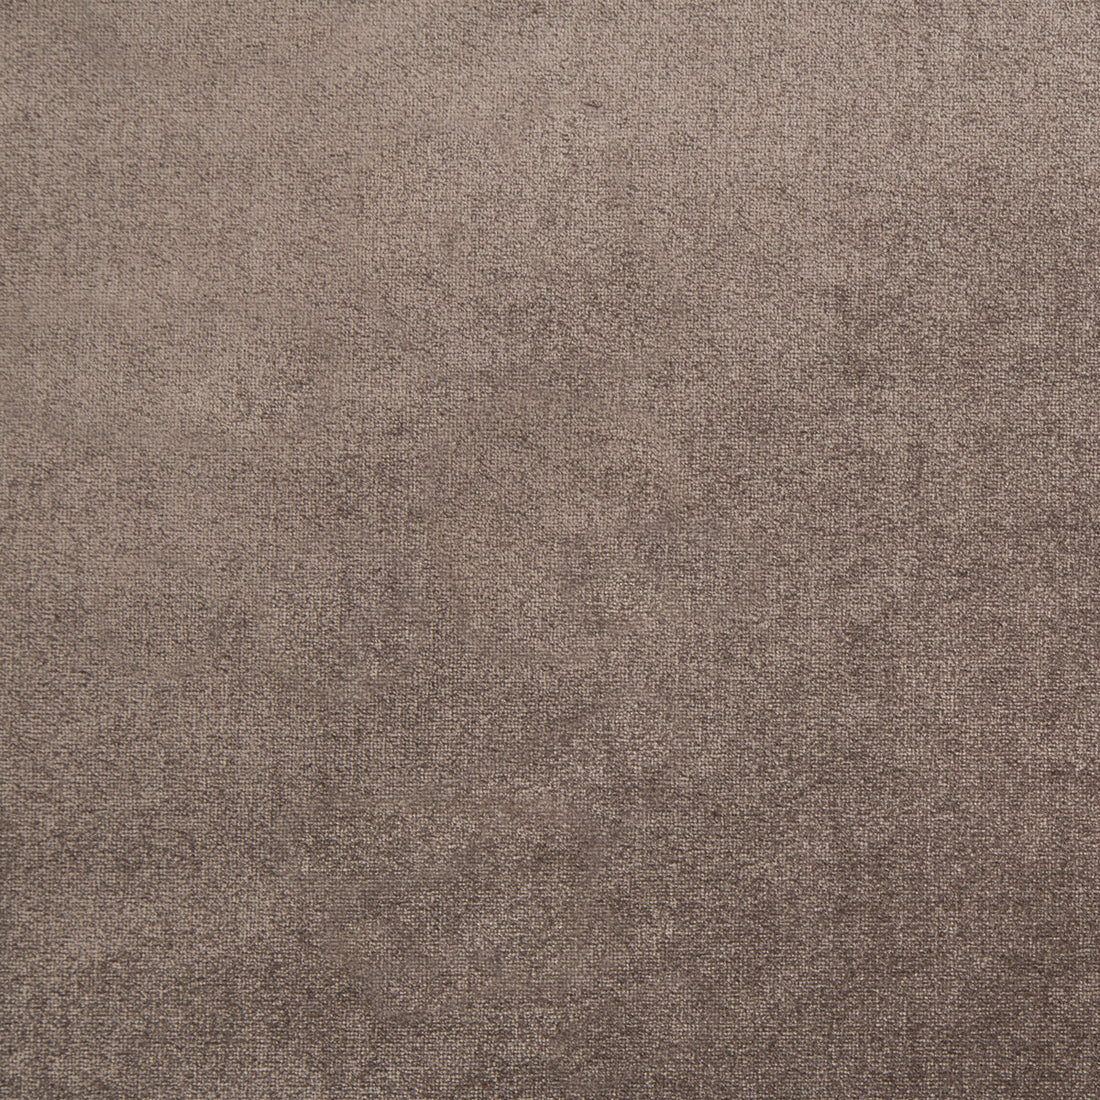 Duchess Velvet fabric in dusty mauve color - pattern 34641.106.0 - by Kravet Couture